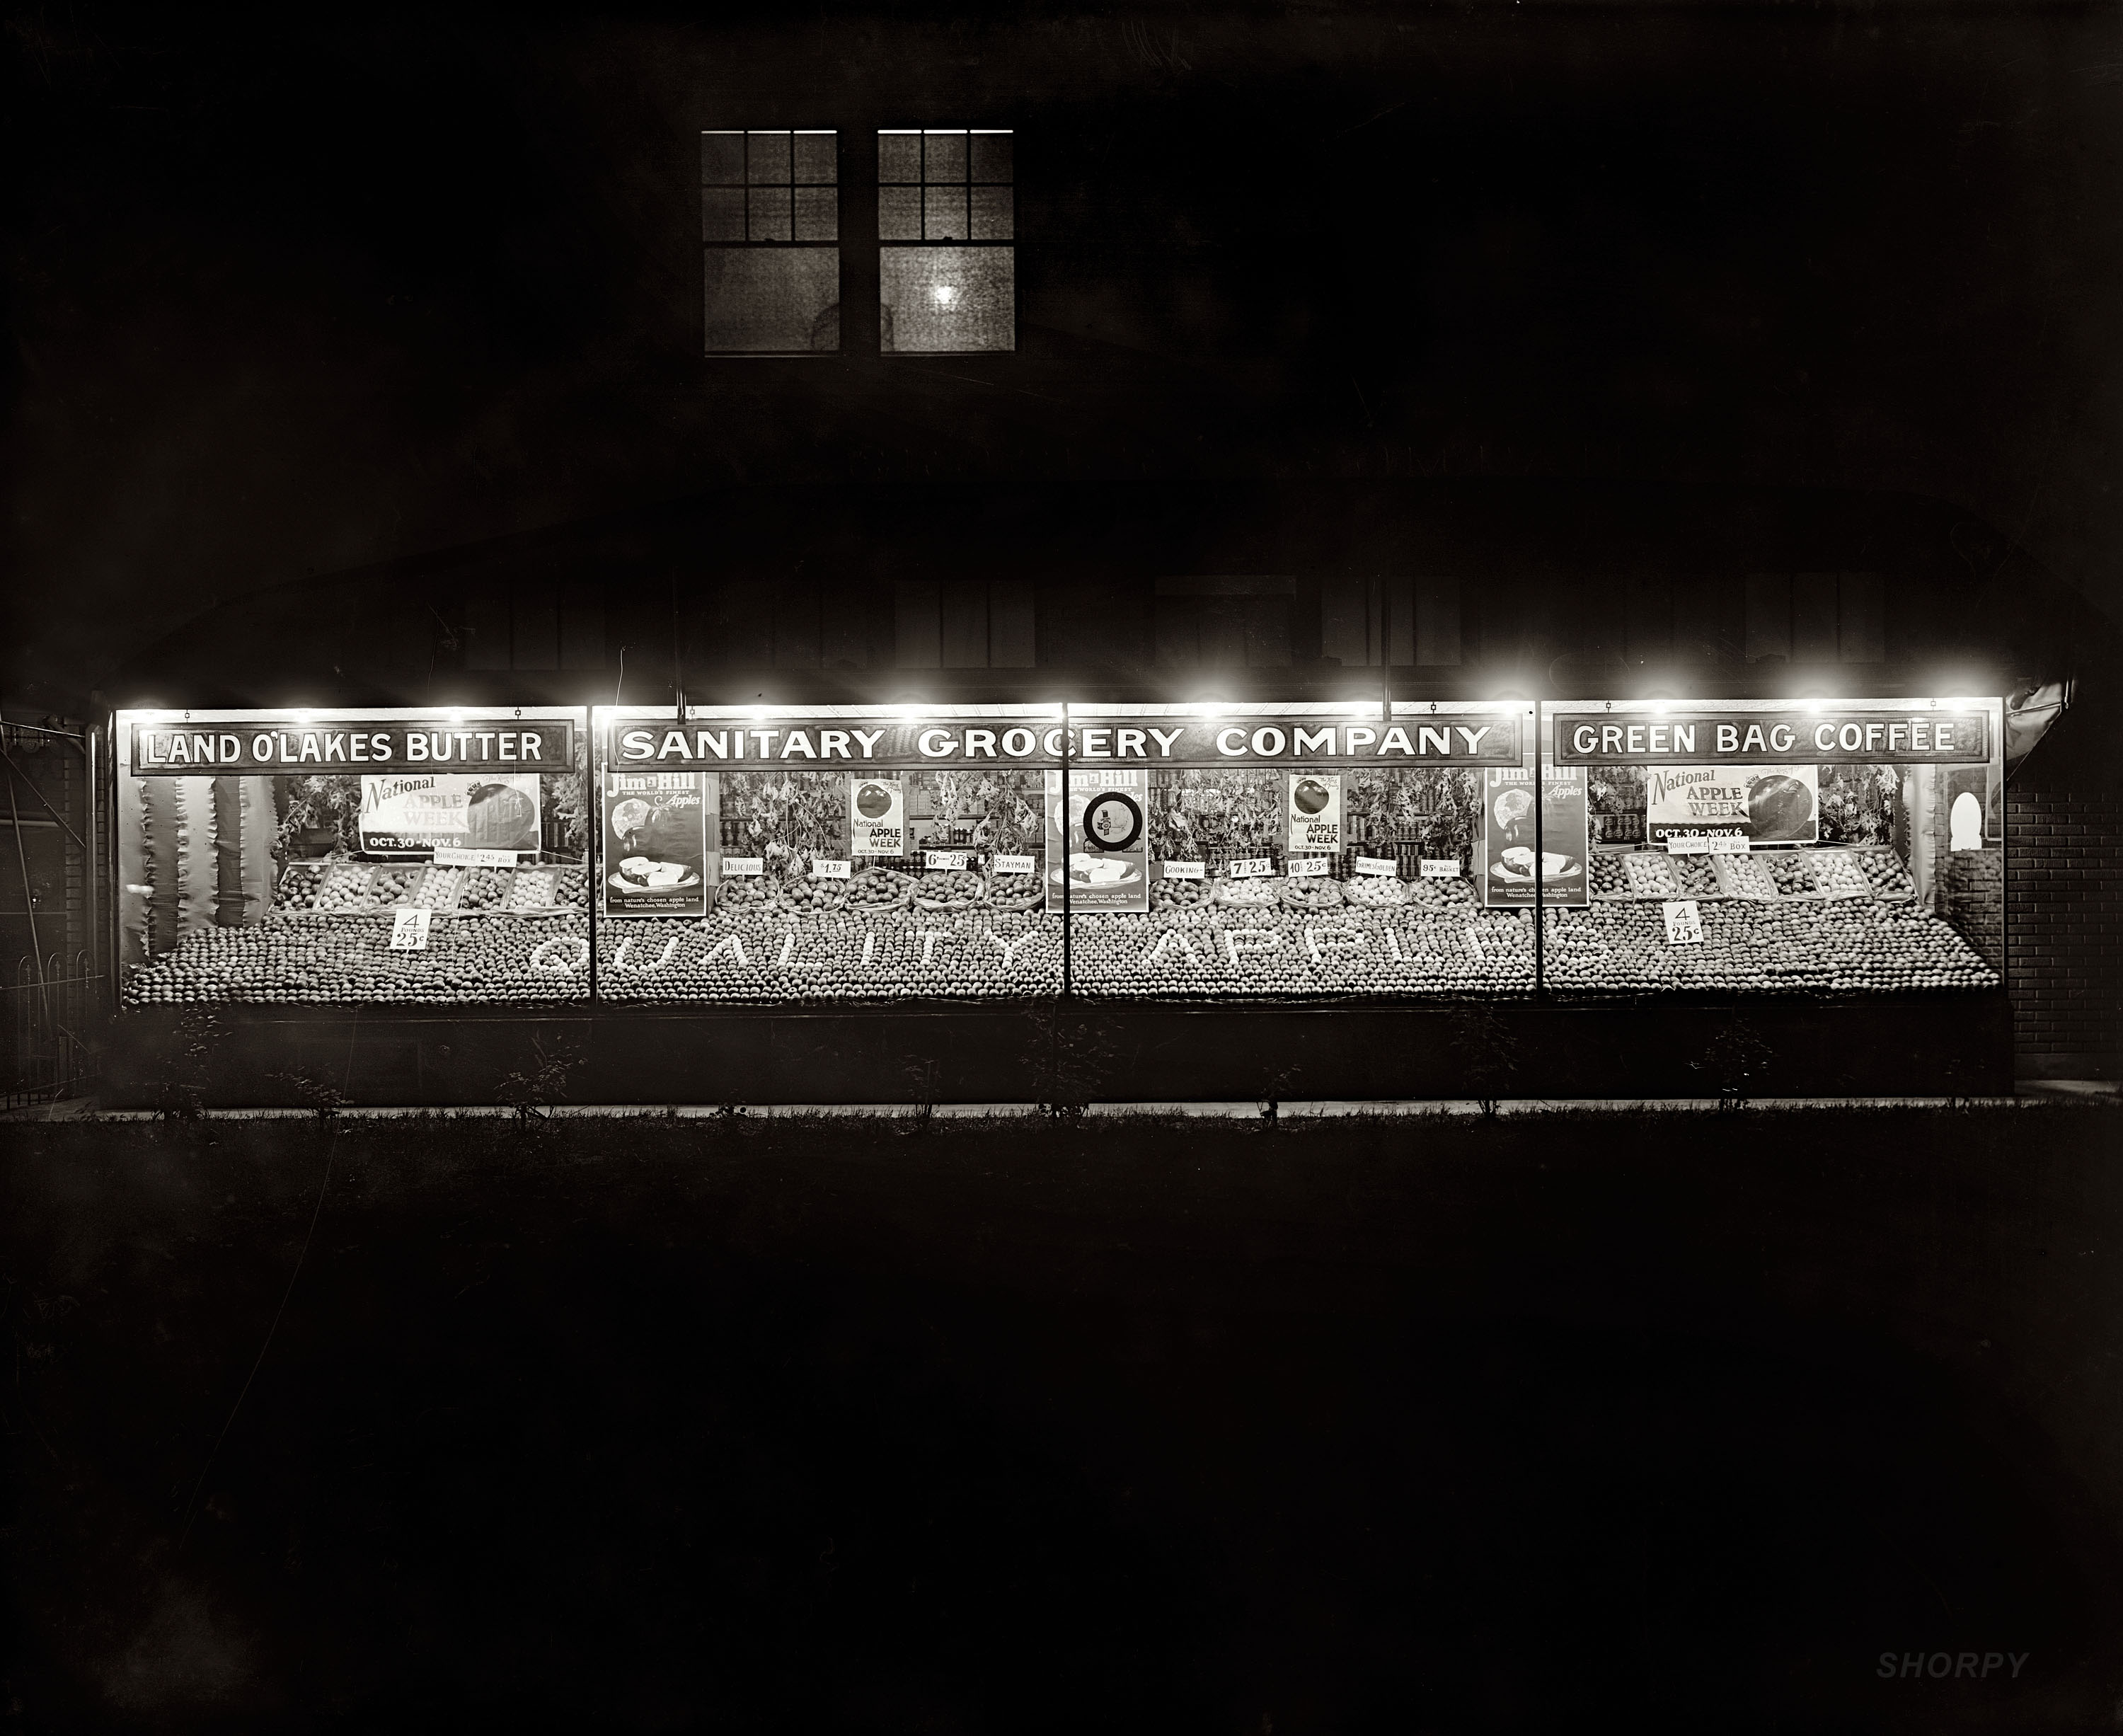 Washington, D.C., 1926. "National Apple Week. Sanitary Grocery." National Photo Company Collection glass negative, Library of Congress. View full size.